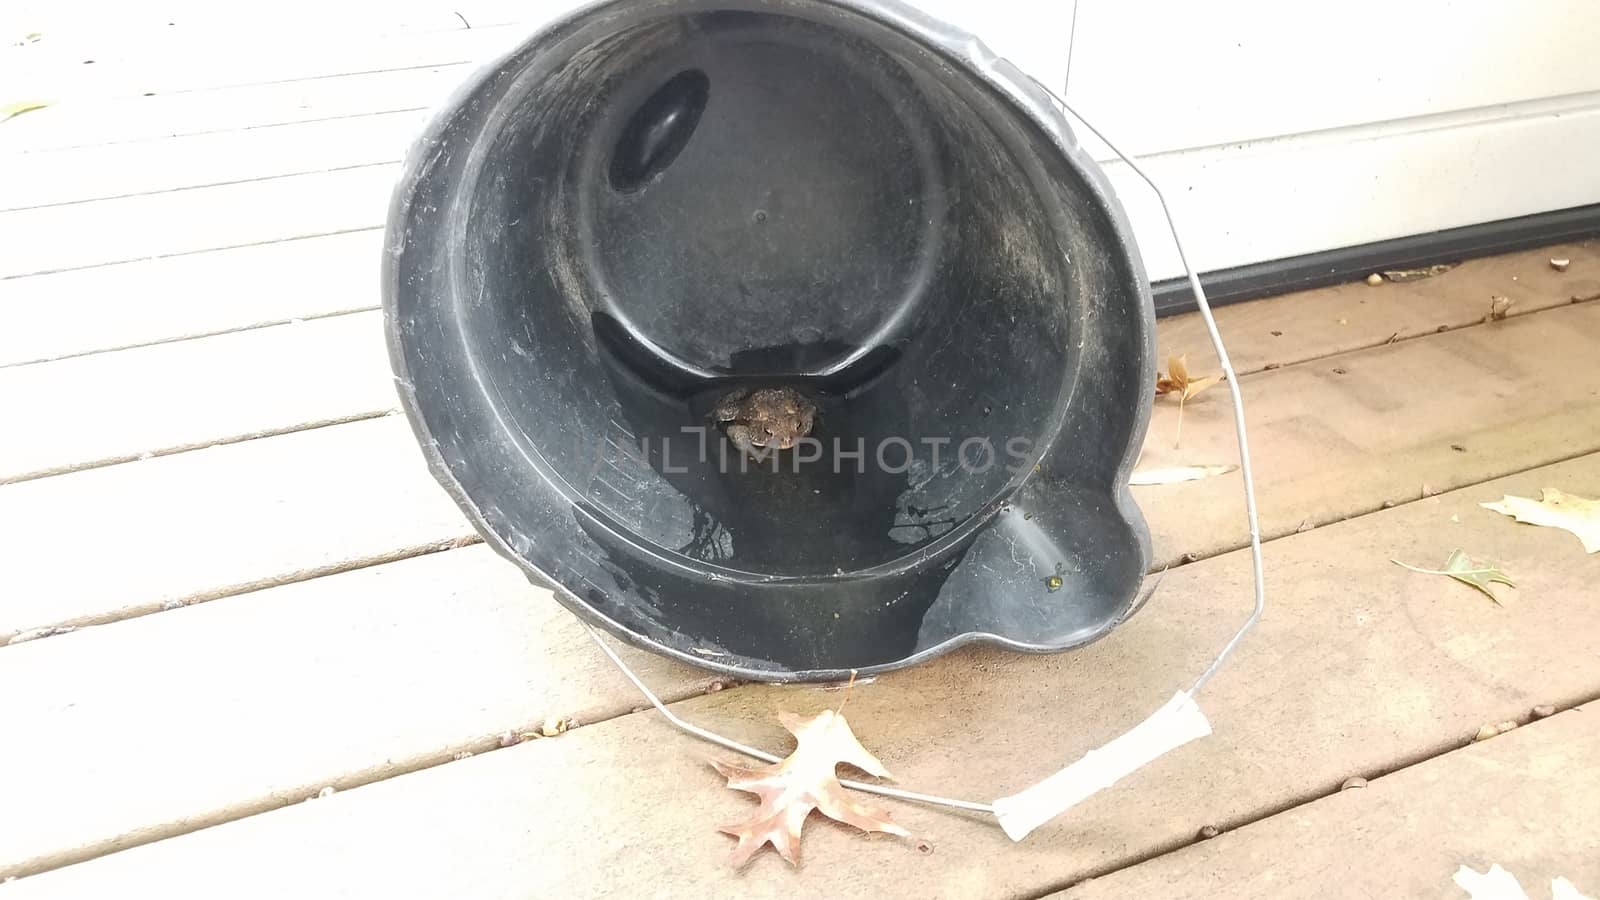 brown frog or toad in black plastic bucket with water by stockphotofan1